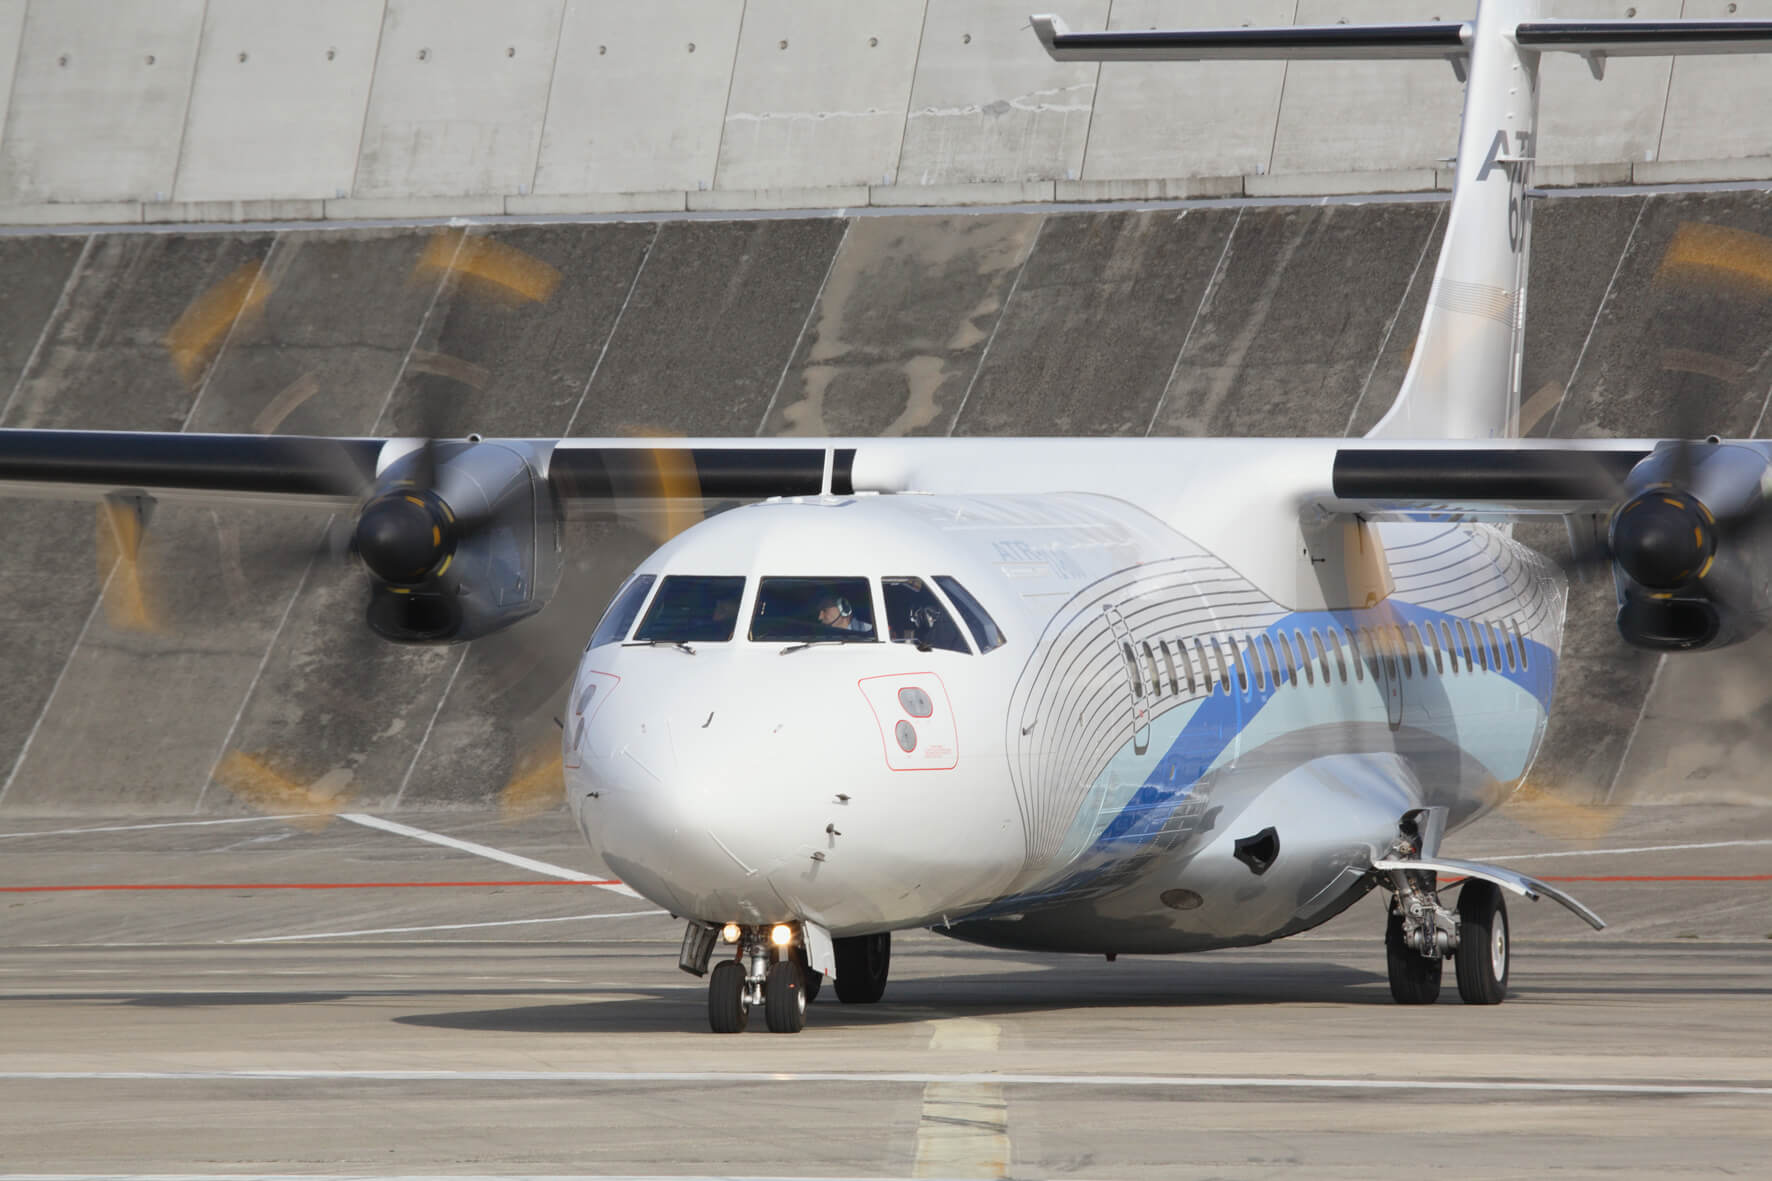 TrueNoord purchases two ATR 72-600 aircraft with leases attached from Castlelake